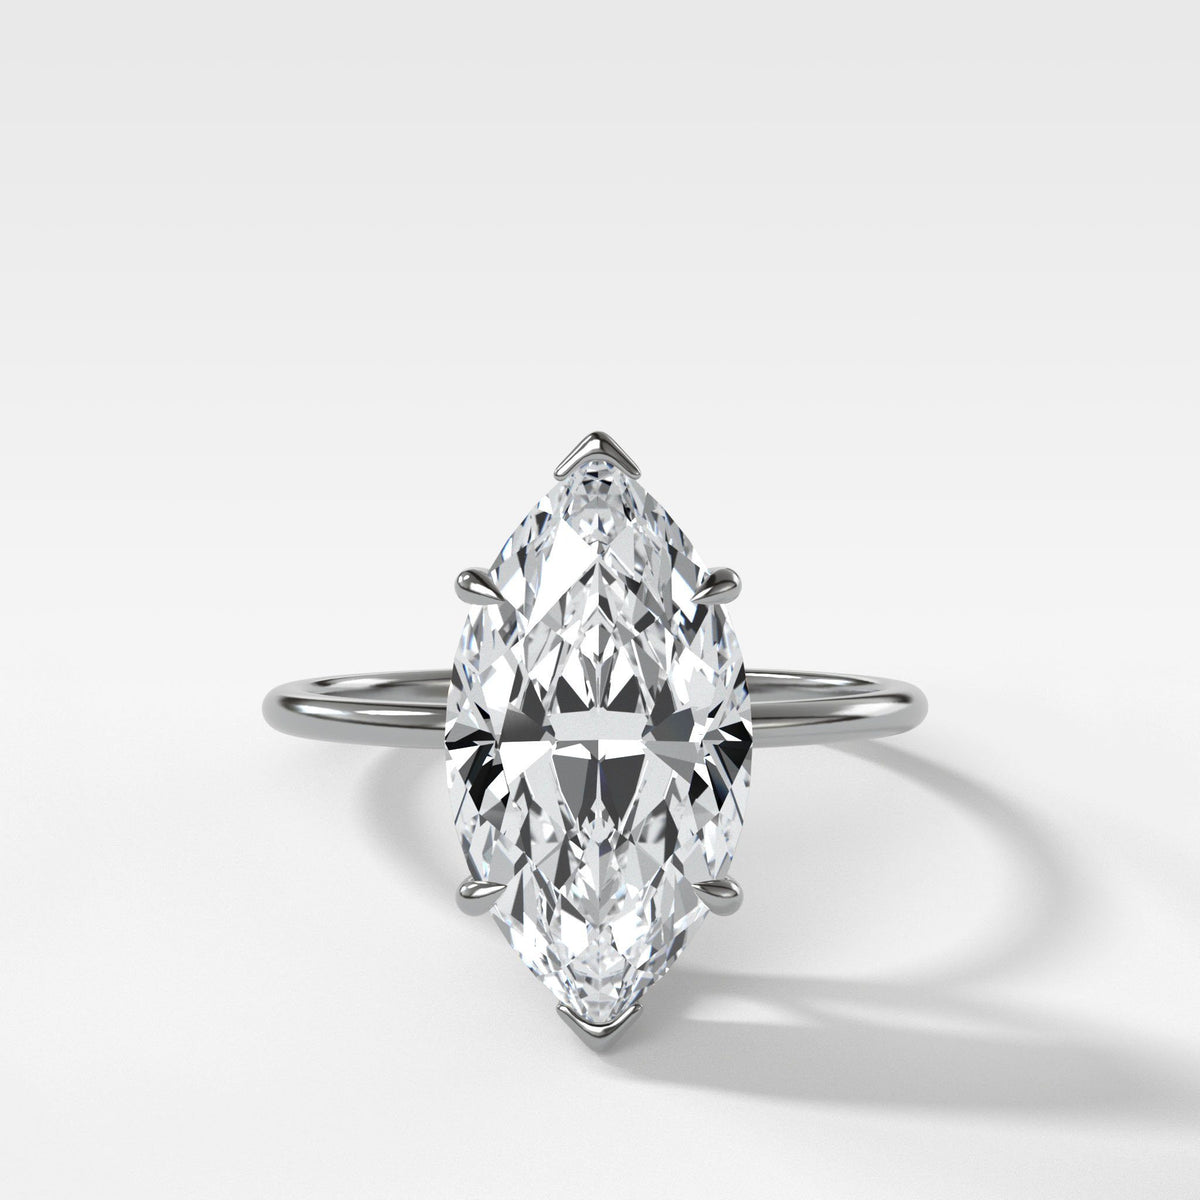 Thin + Simple Solitaire With Marquise Cut by Good Stone in White Gold